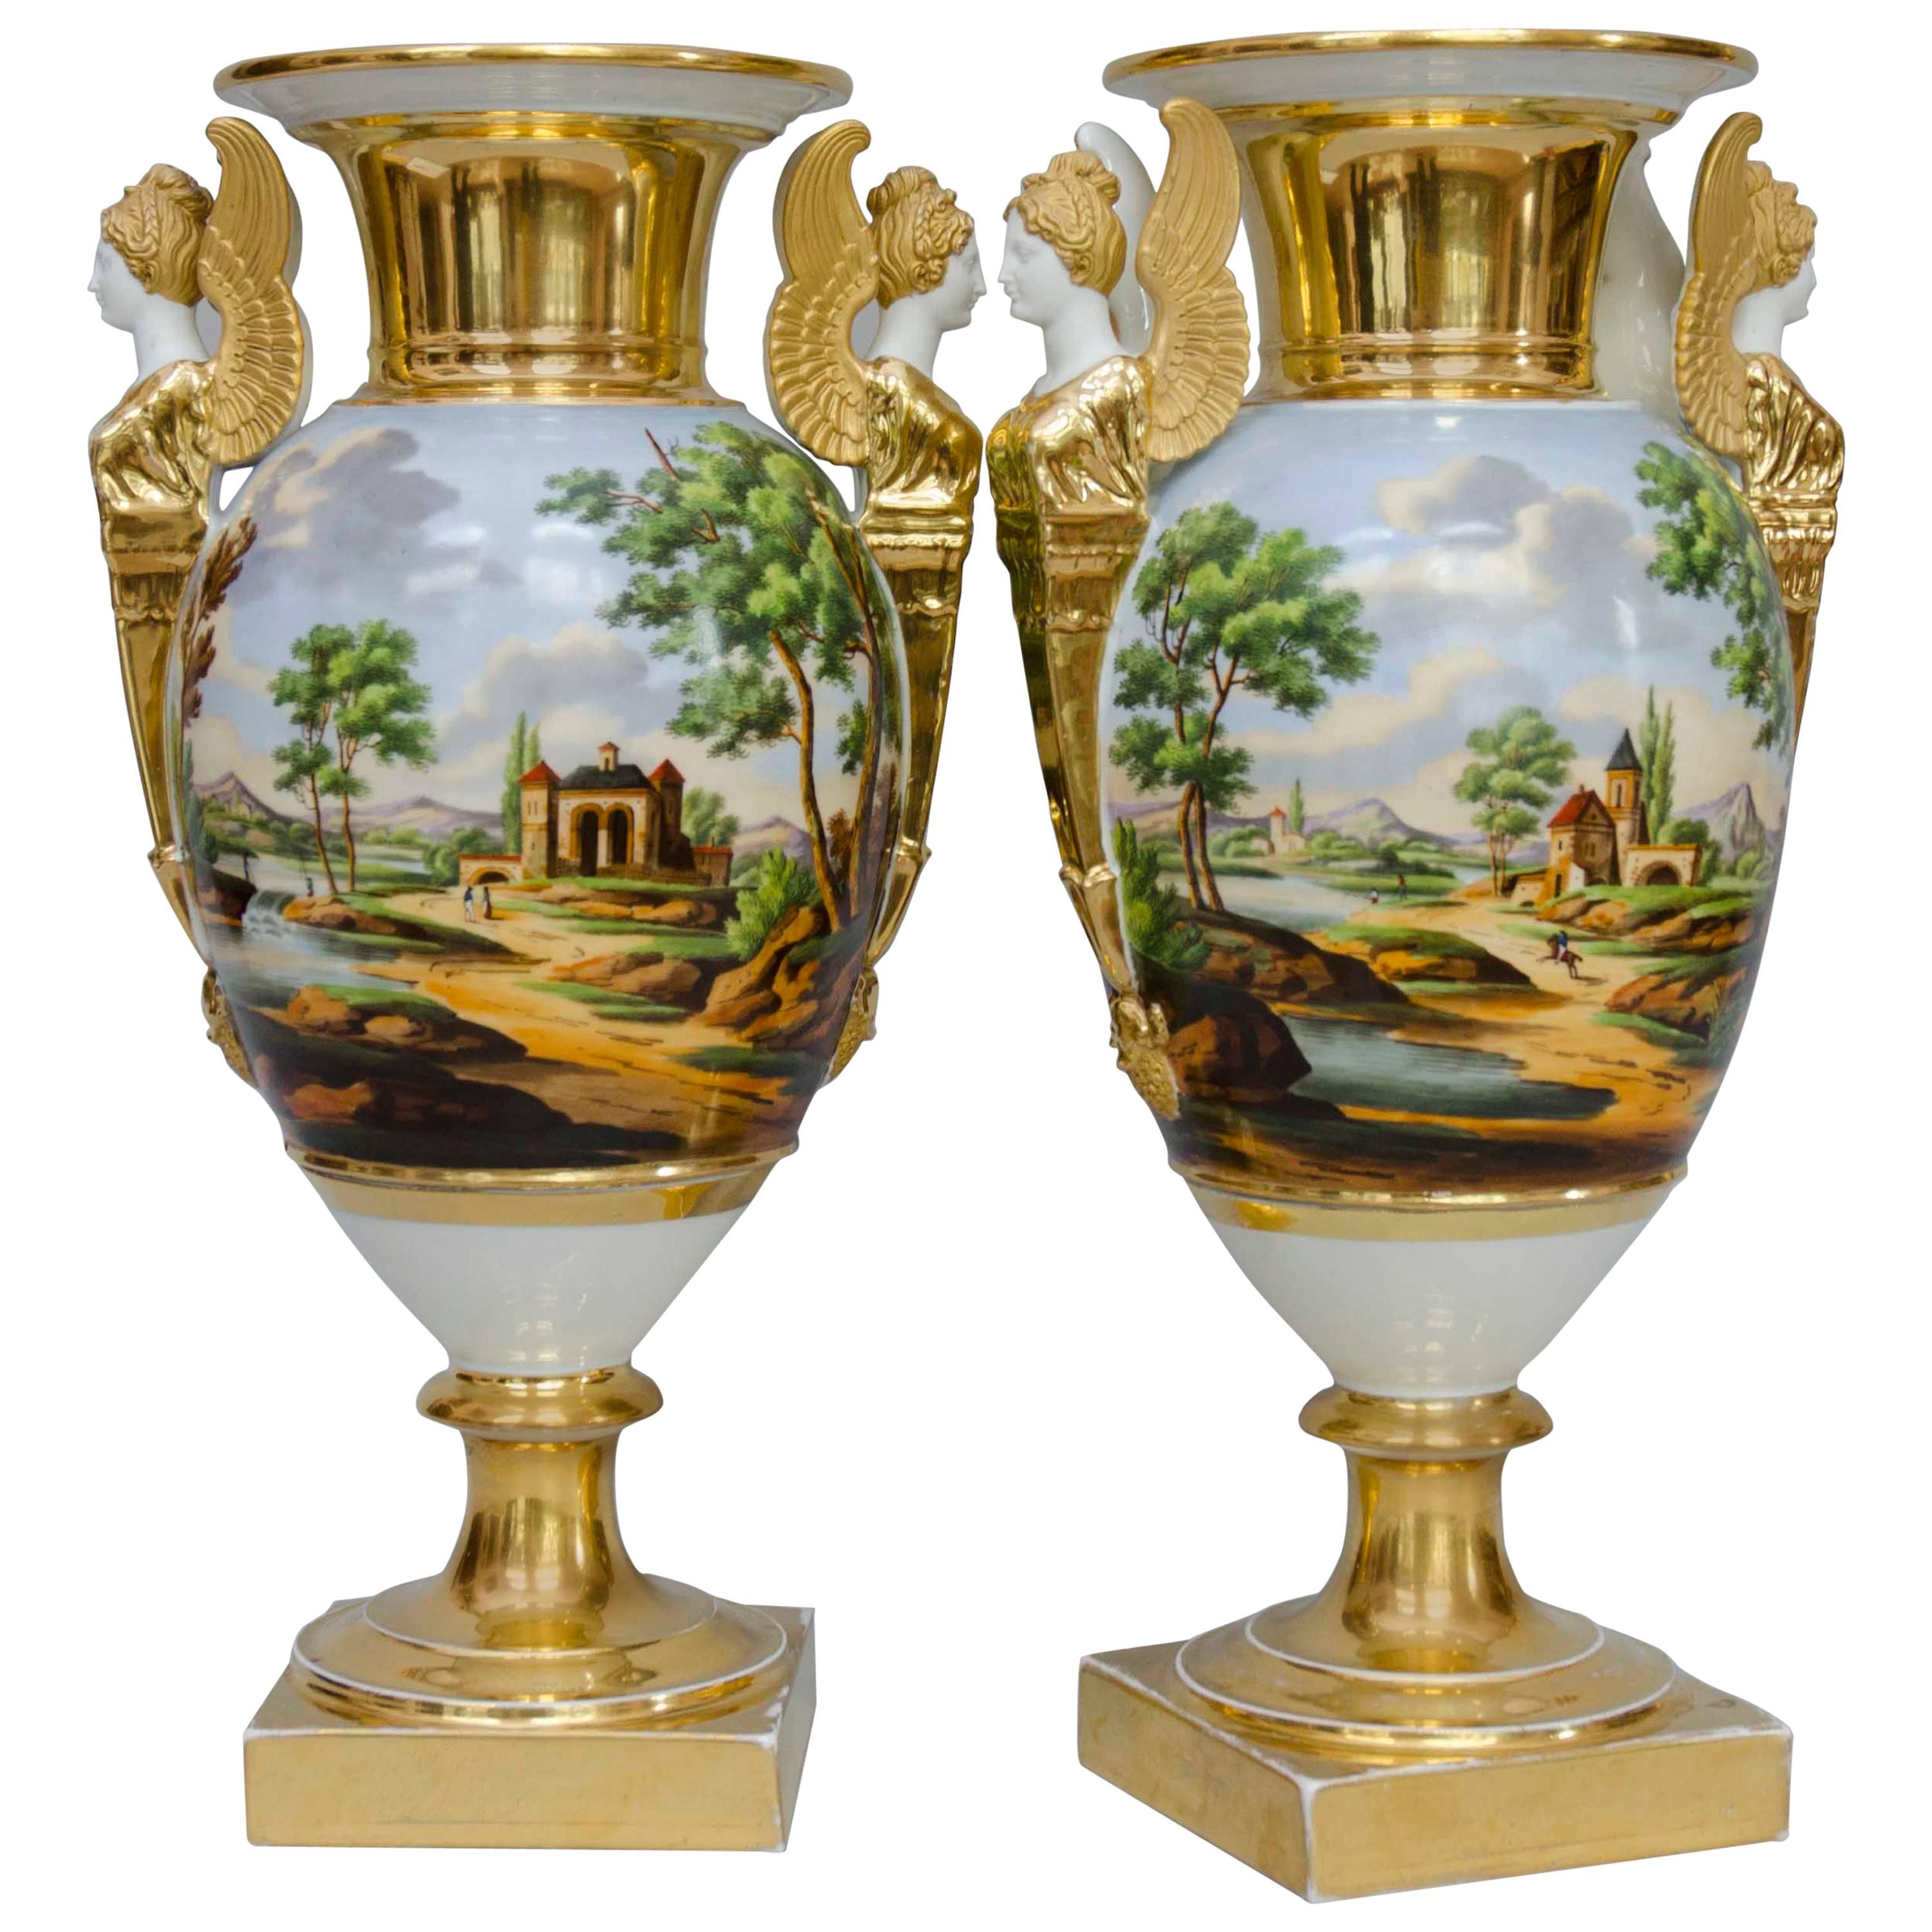 Early 19th Century Pair of Large Egg Shaped Vases, Italian Landscapes, Paris For Sale